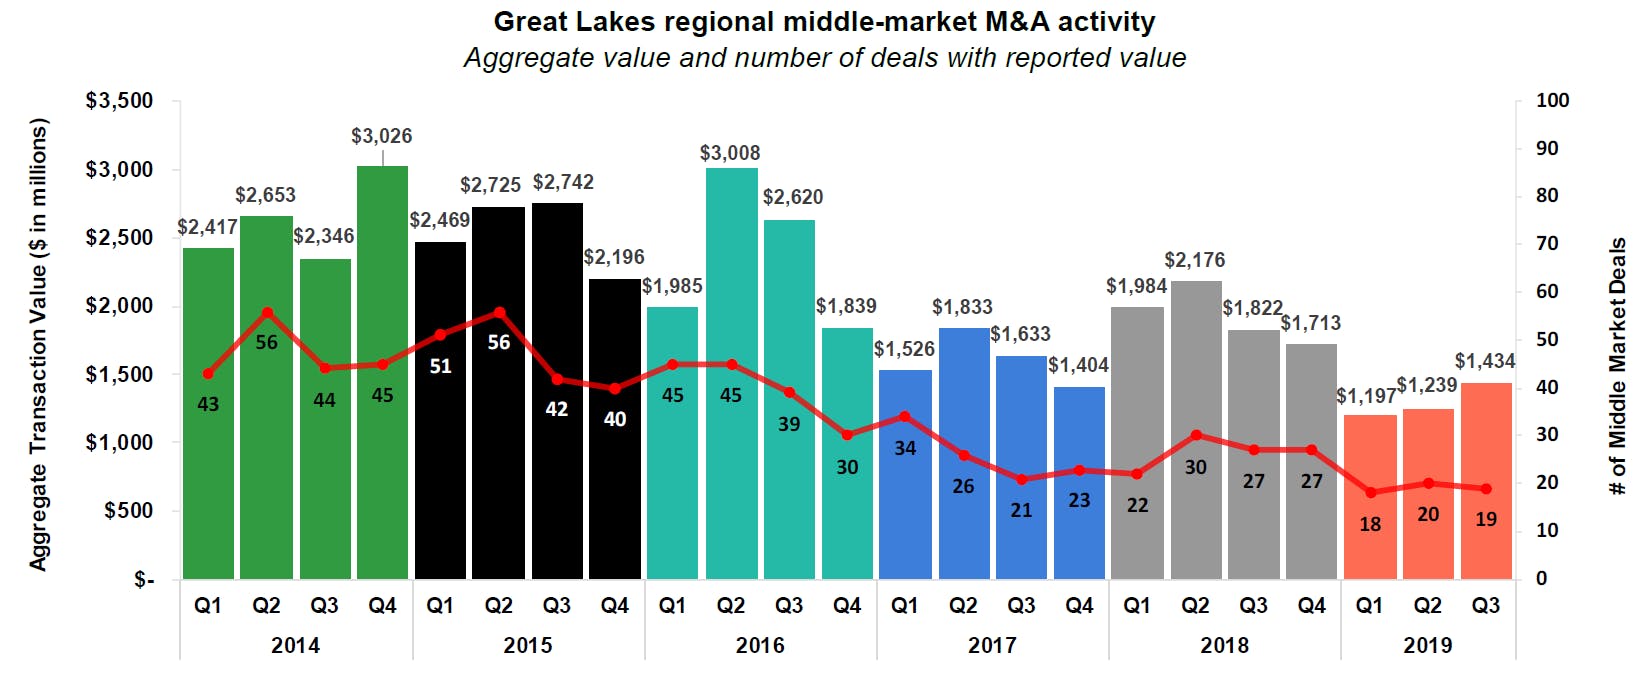 Great Lakes regional middle-market M&A activity